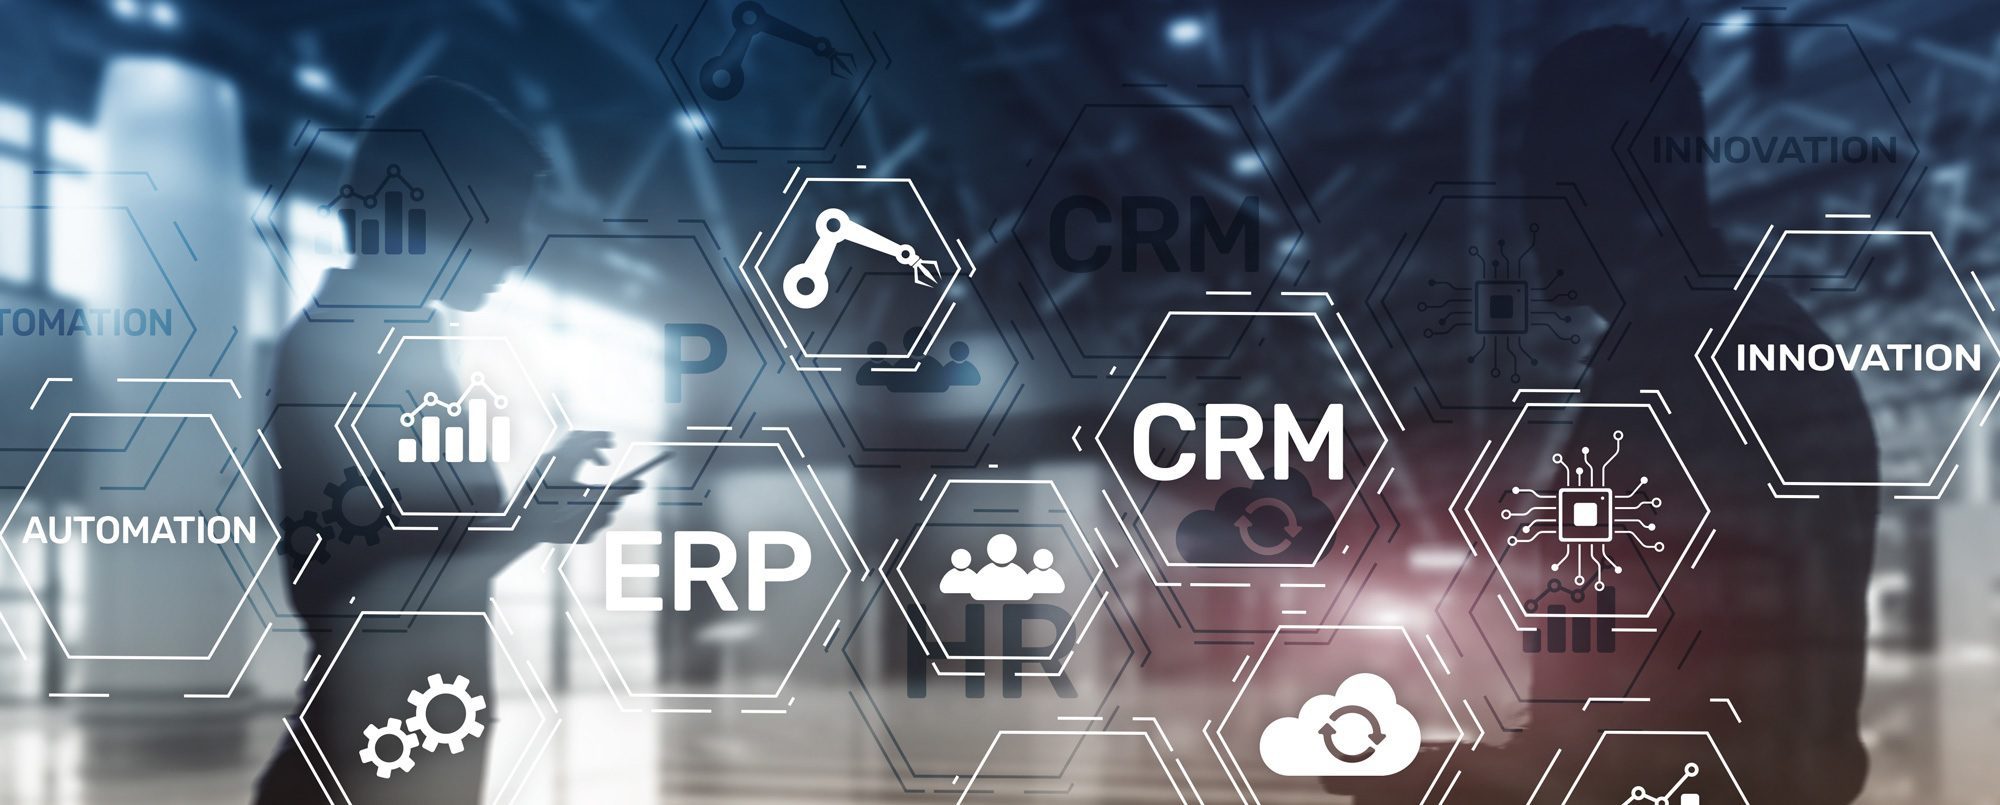 Why CRM and ERP Integration